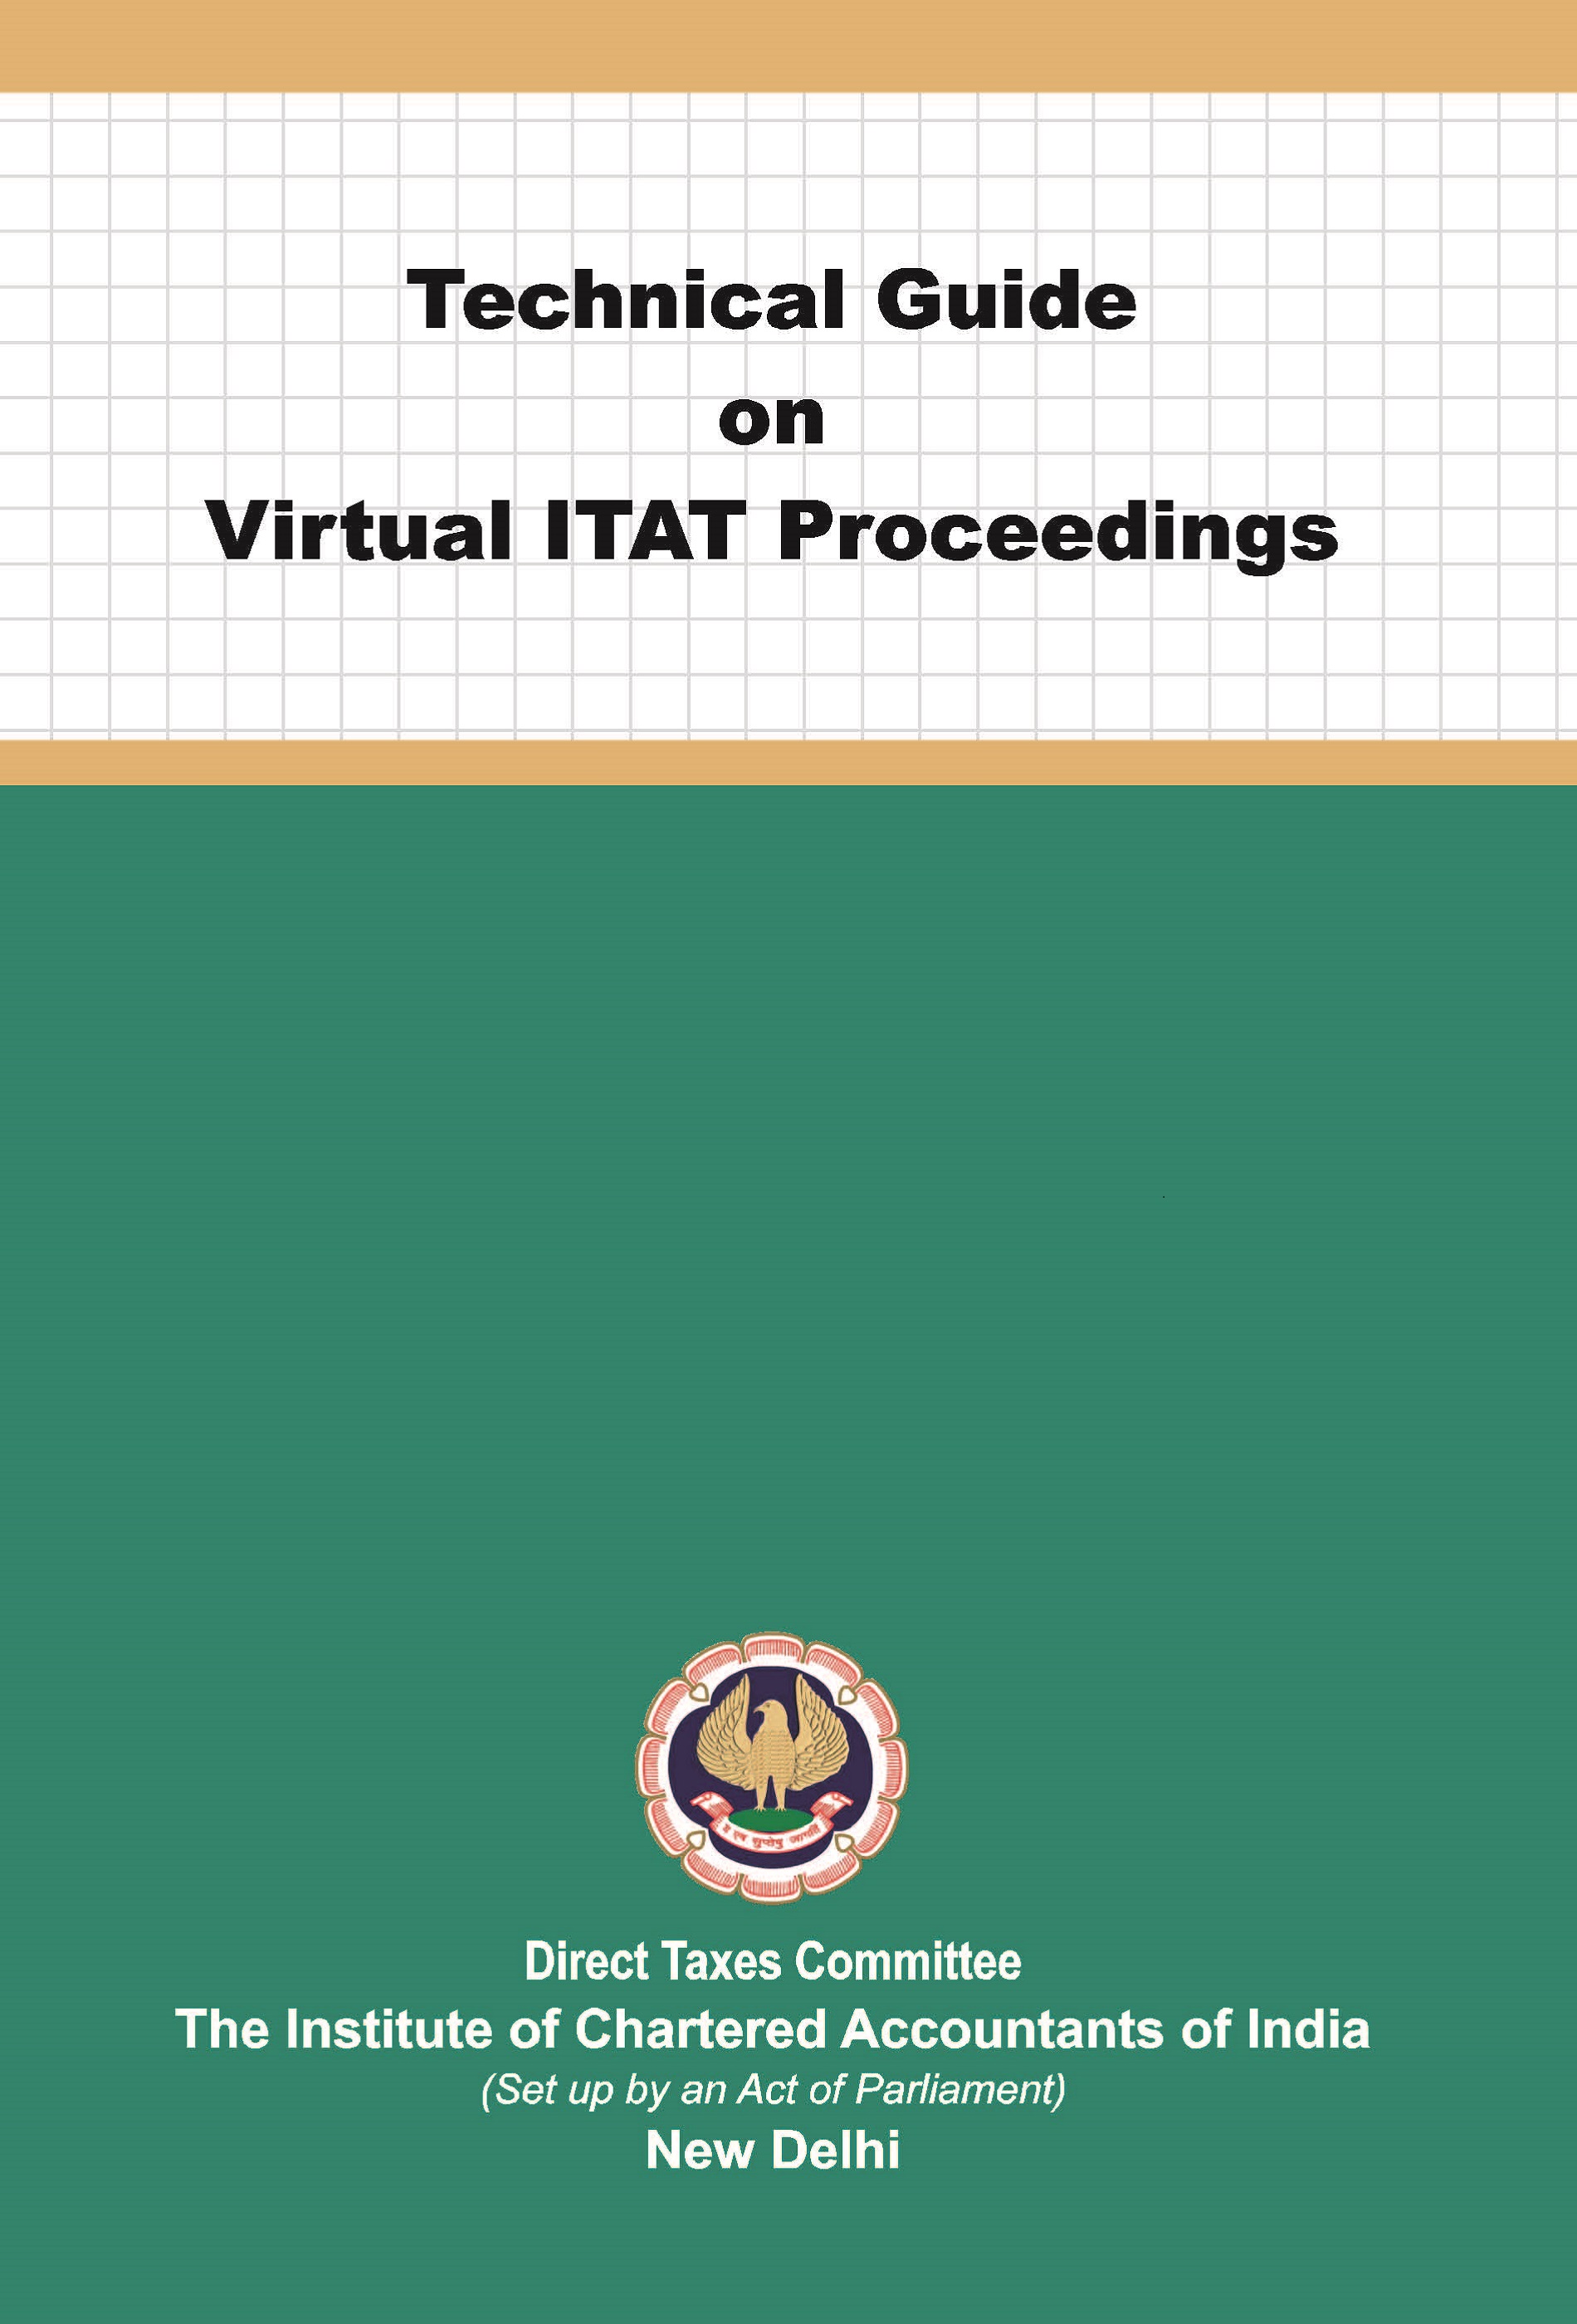 Technical Guide on Virtual ITAT Proceedings (August, 2021)